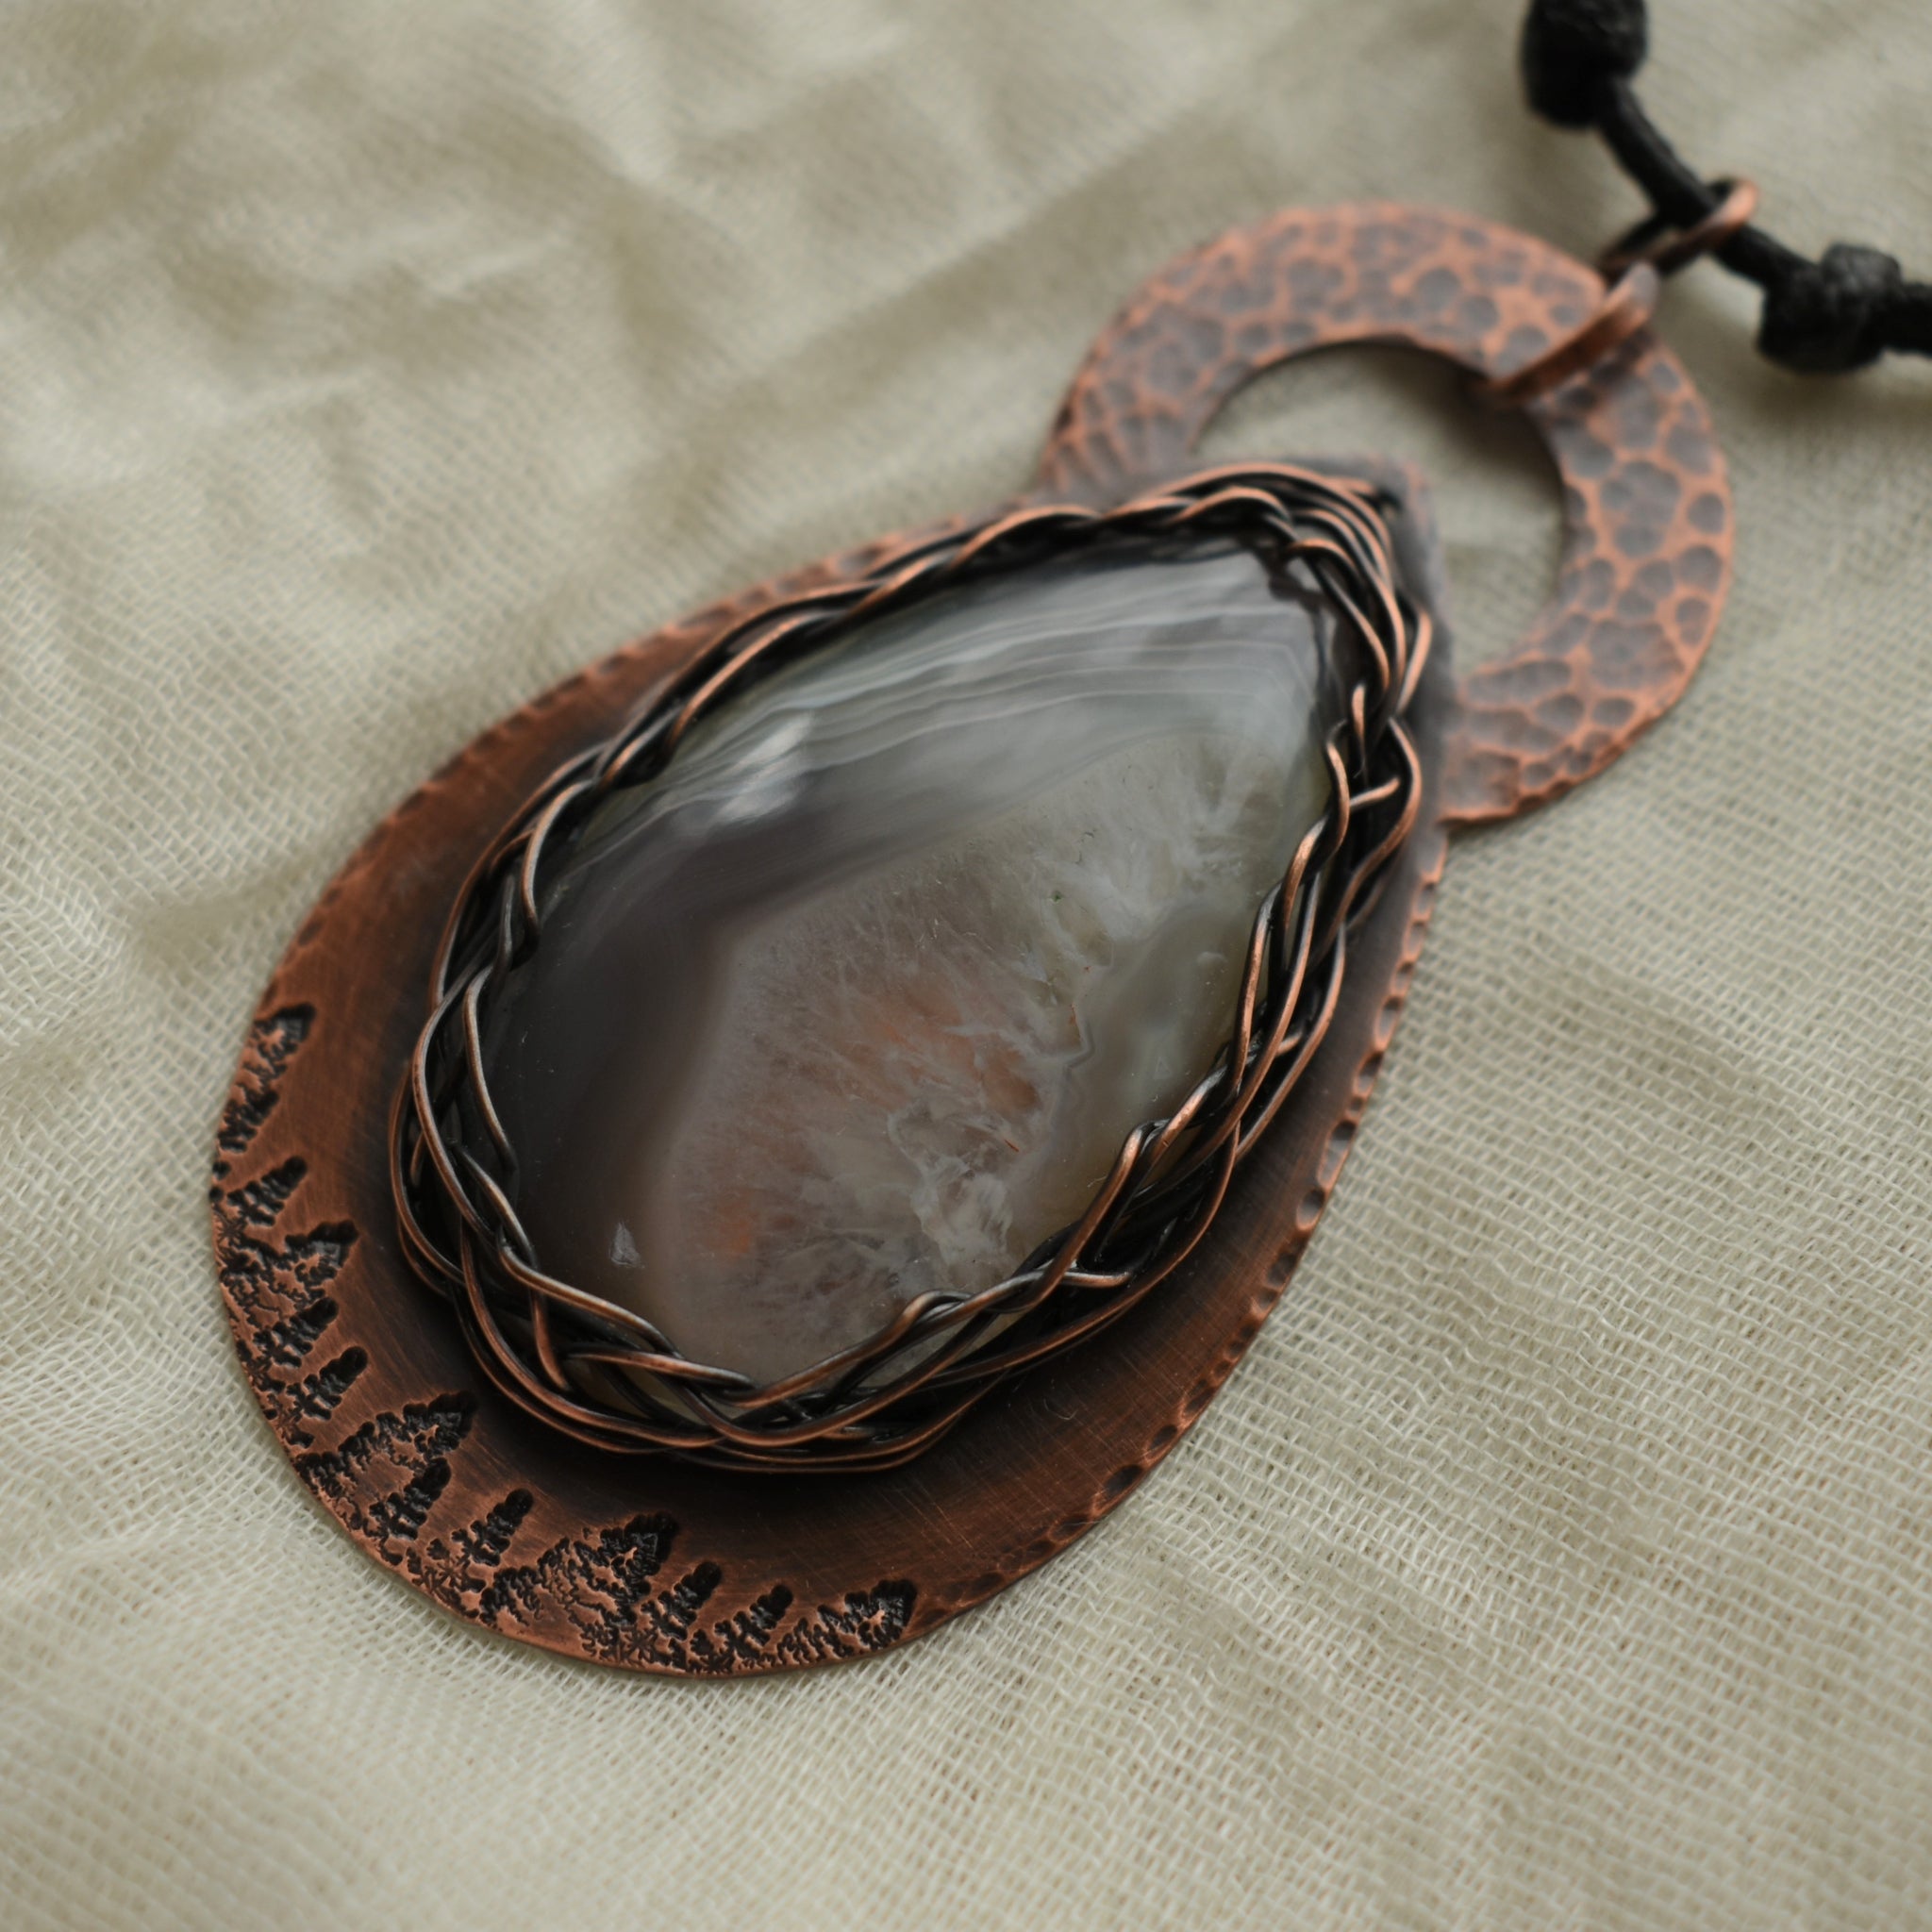 Rustic gemstone copper jewelry for the natural spirit.